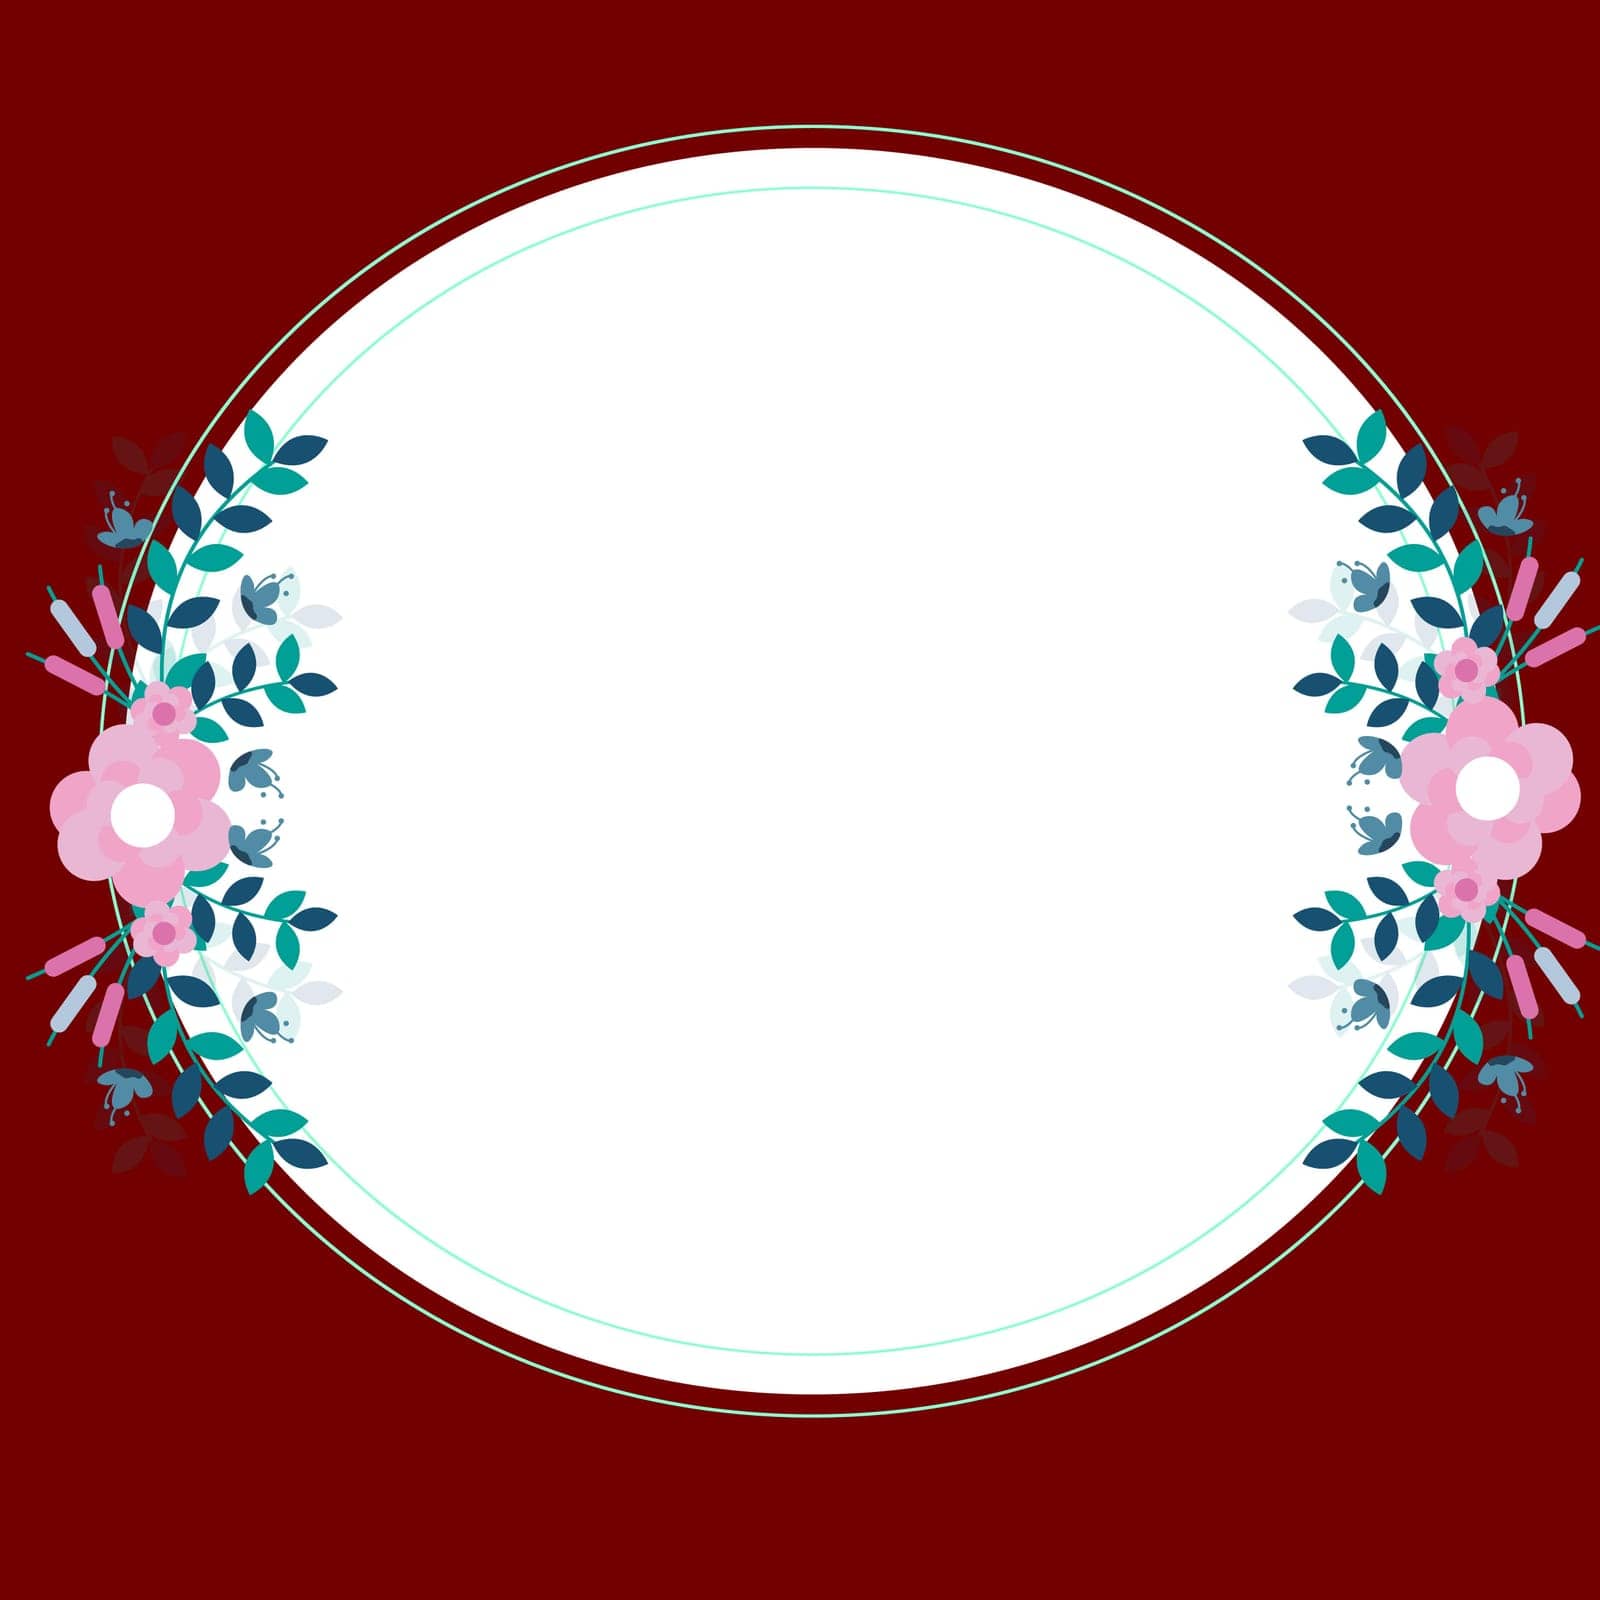 Red Blank Circle Frame Decorated With Colorful Flowers And Foliage